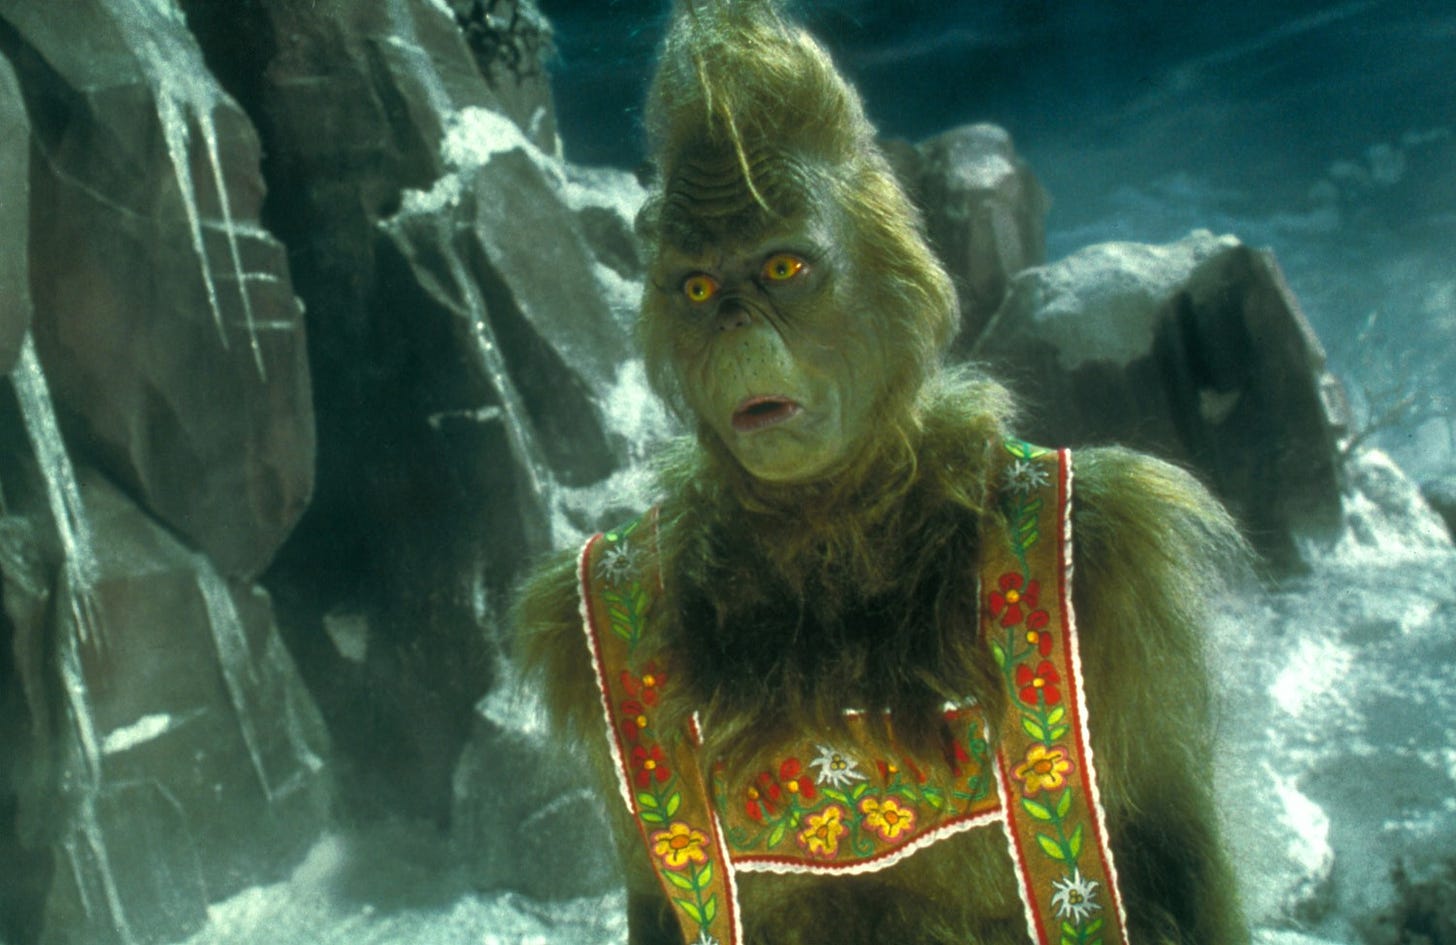 The Grinch - How The Grinch Stole Christmas Photo (30805502) - Fanpop -  Page 2